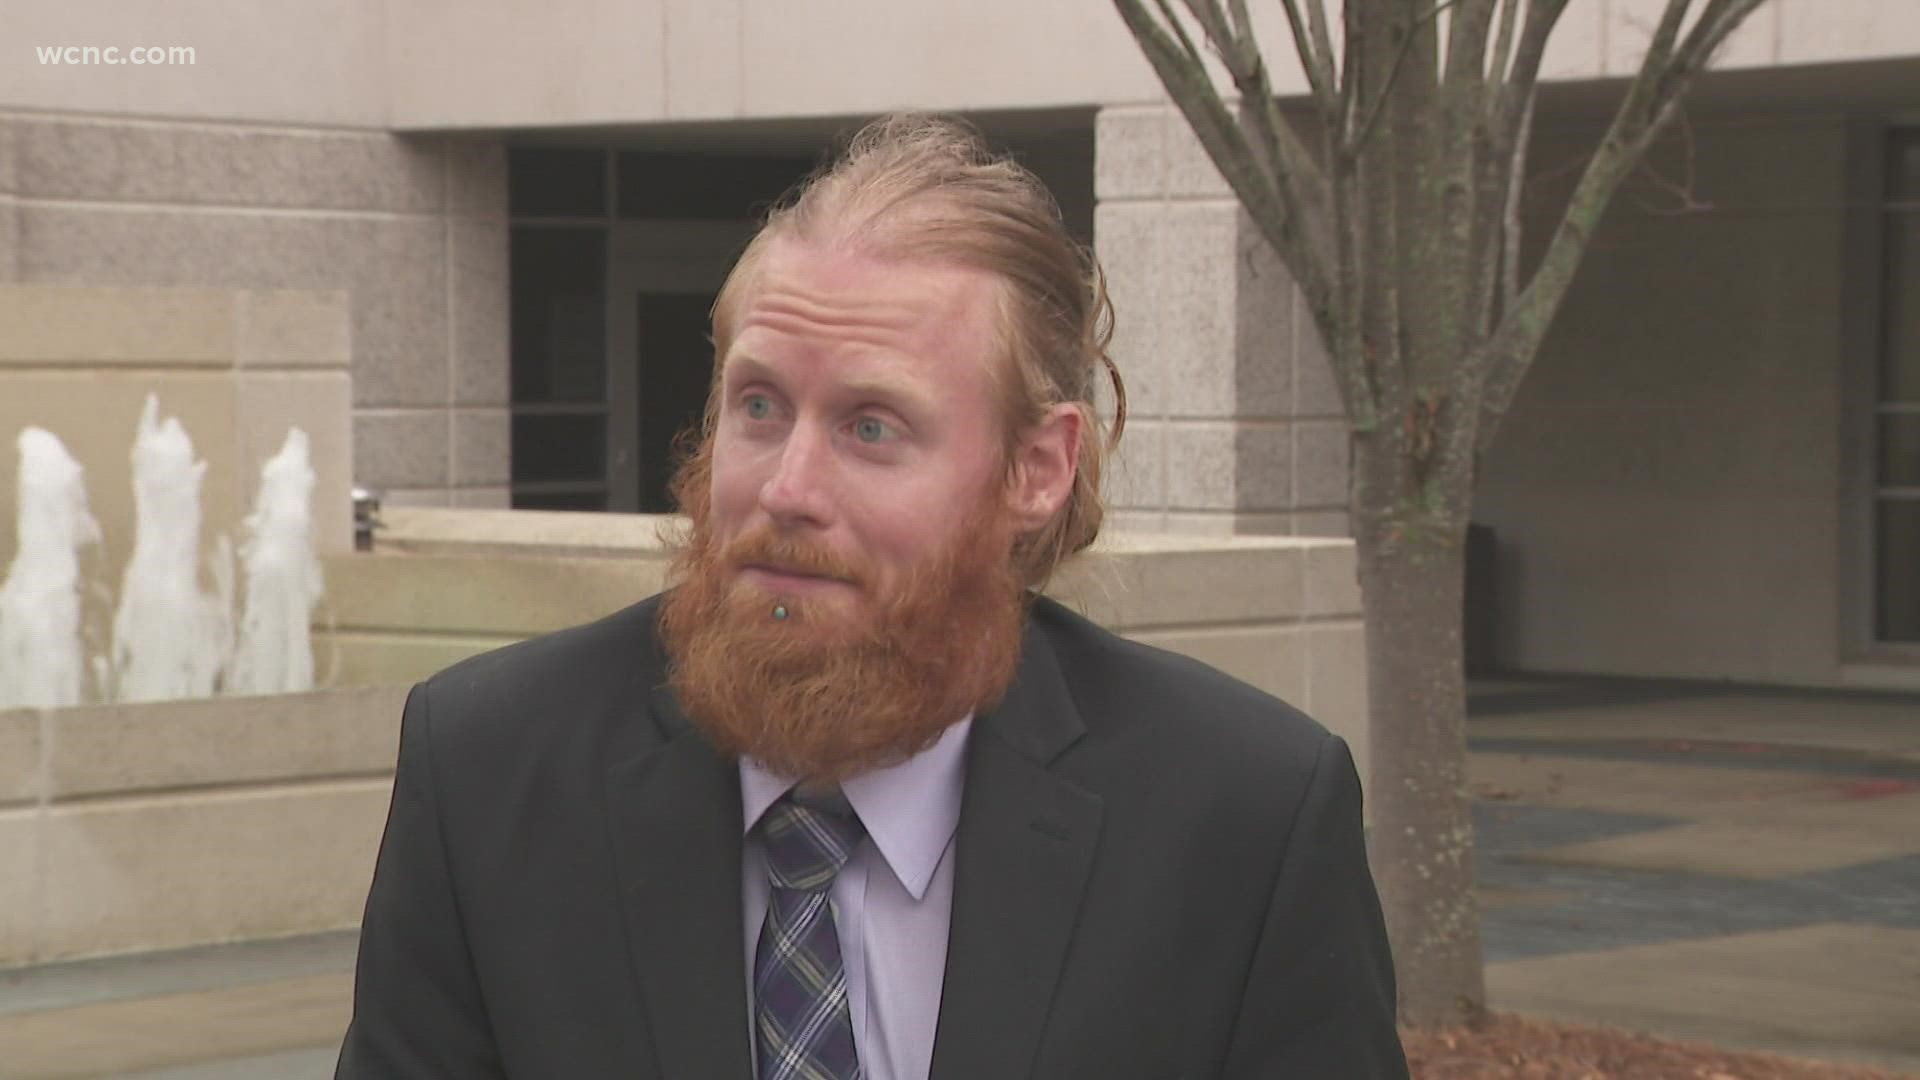 Earlier this month, WCNC Charlotte petitioned a judge to order Gastonia Police to release all body camera videos of this arrest, but the petition was denied.